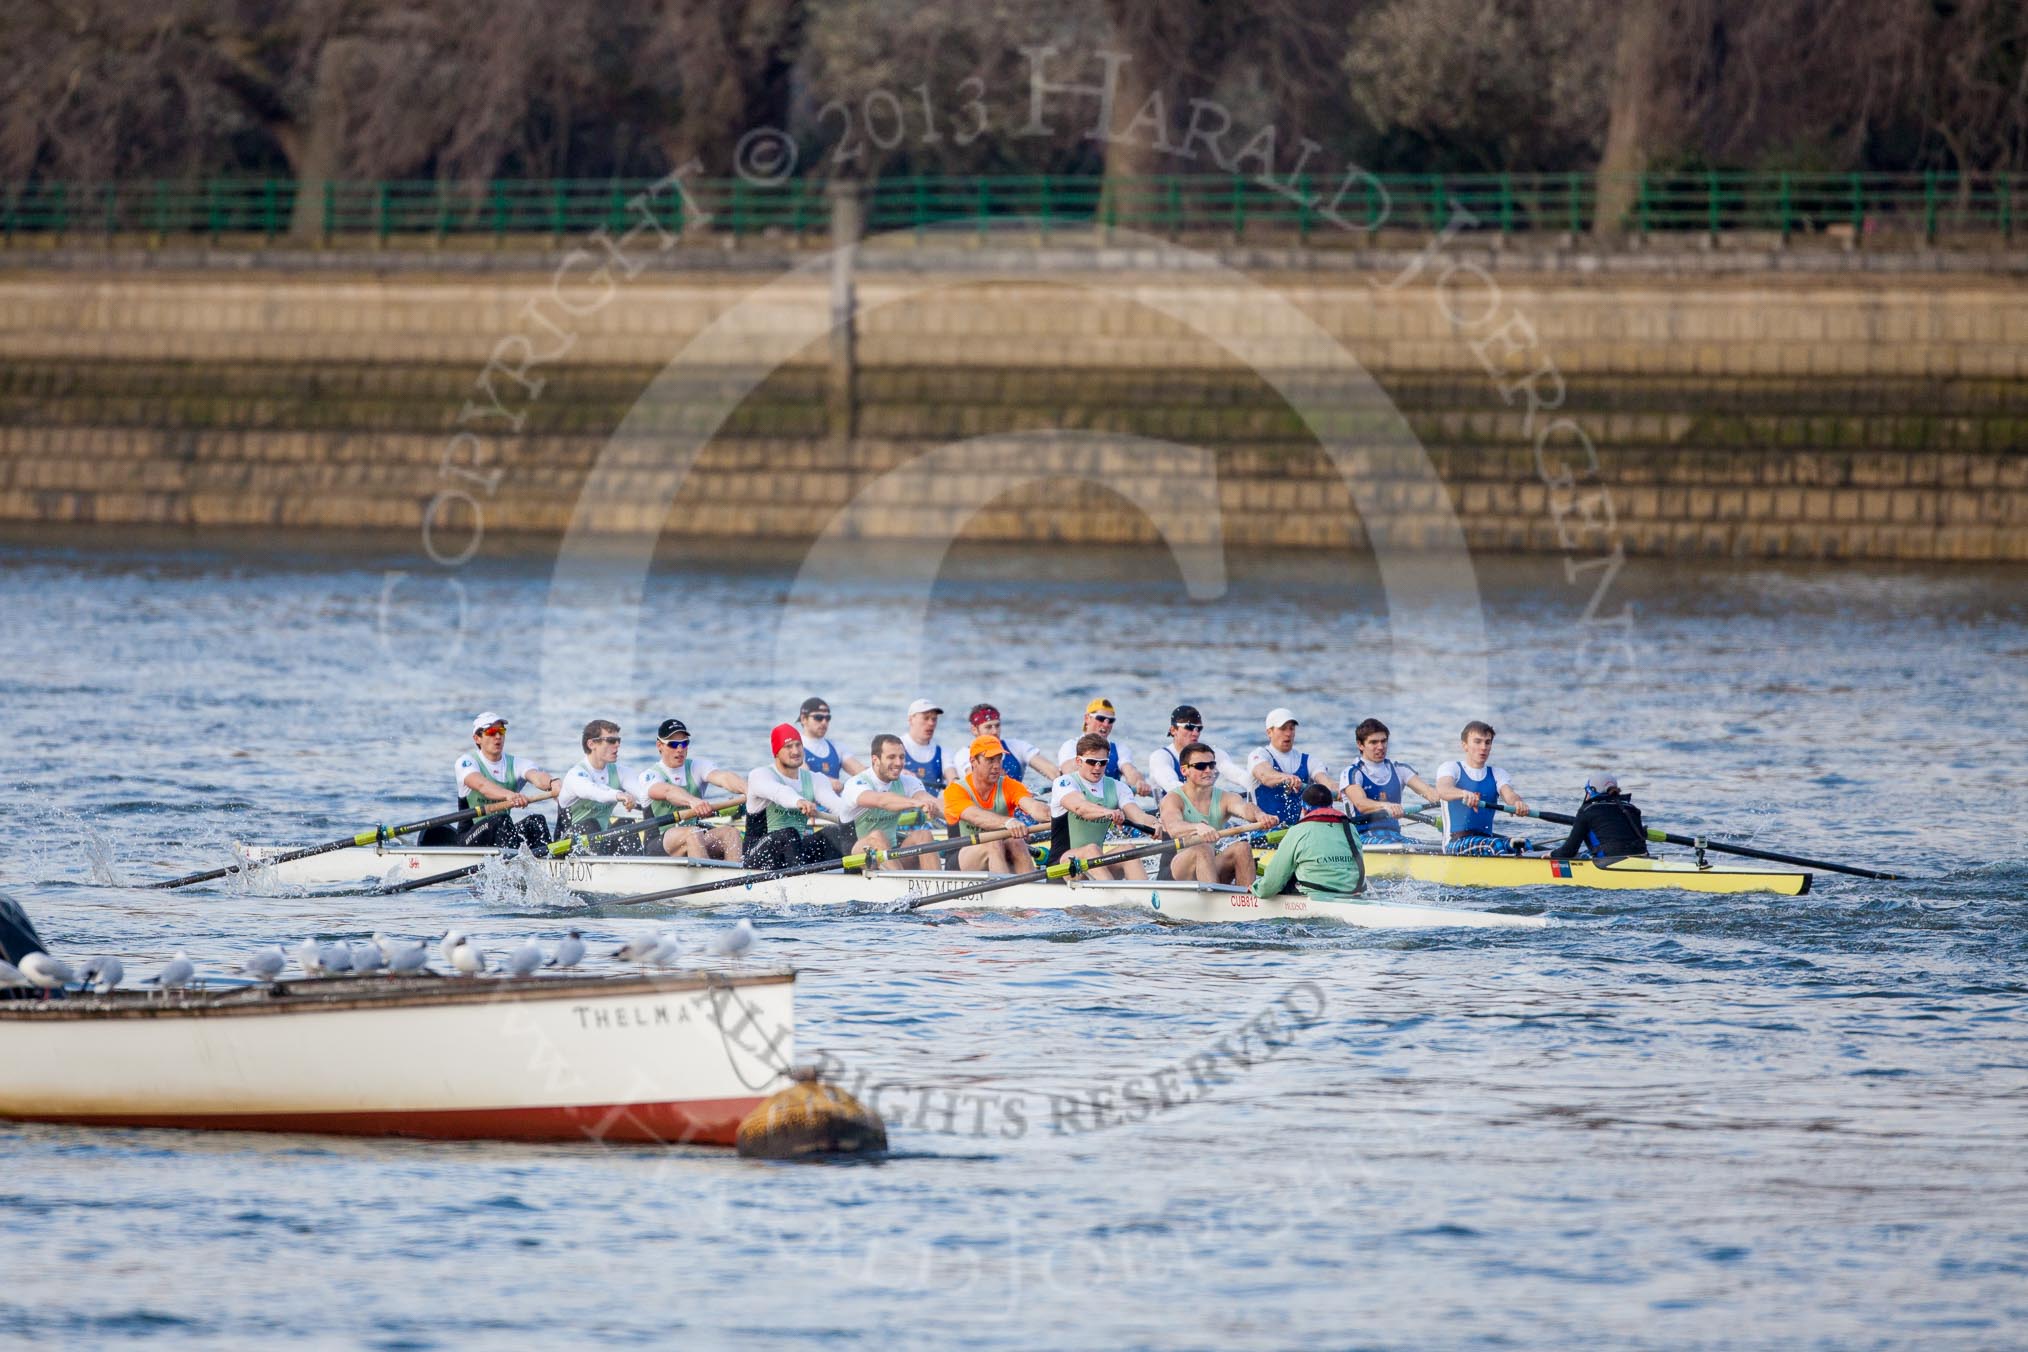 The Boat Race season 2013 - fixture CUBC vs Leander: The Goldie vs Imperial BC fixture..
River Thames Tideway between Putney Bridge and Mortlake,
London SW15,

United Kingdom,
on 02 March 2013 at 15:23, image #56